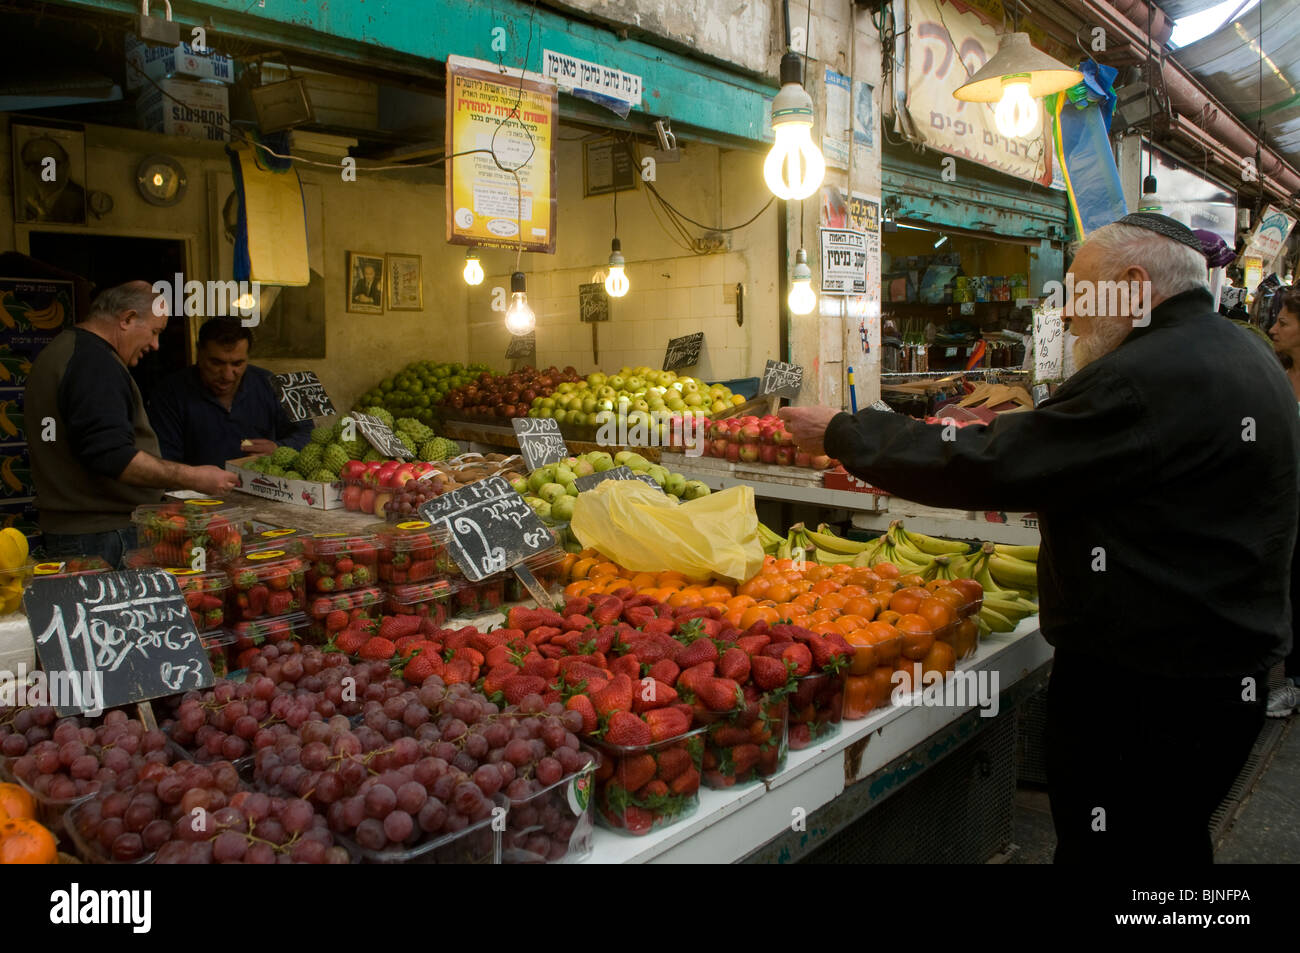 Man buying fruits in Mahane or Machane Yehuda market often referred to as 'The Shuk', an open-air, marketplace in West Jerusalem, Israel Stock Photo